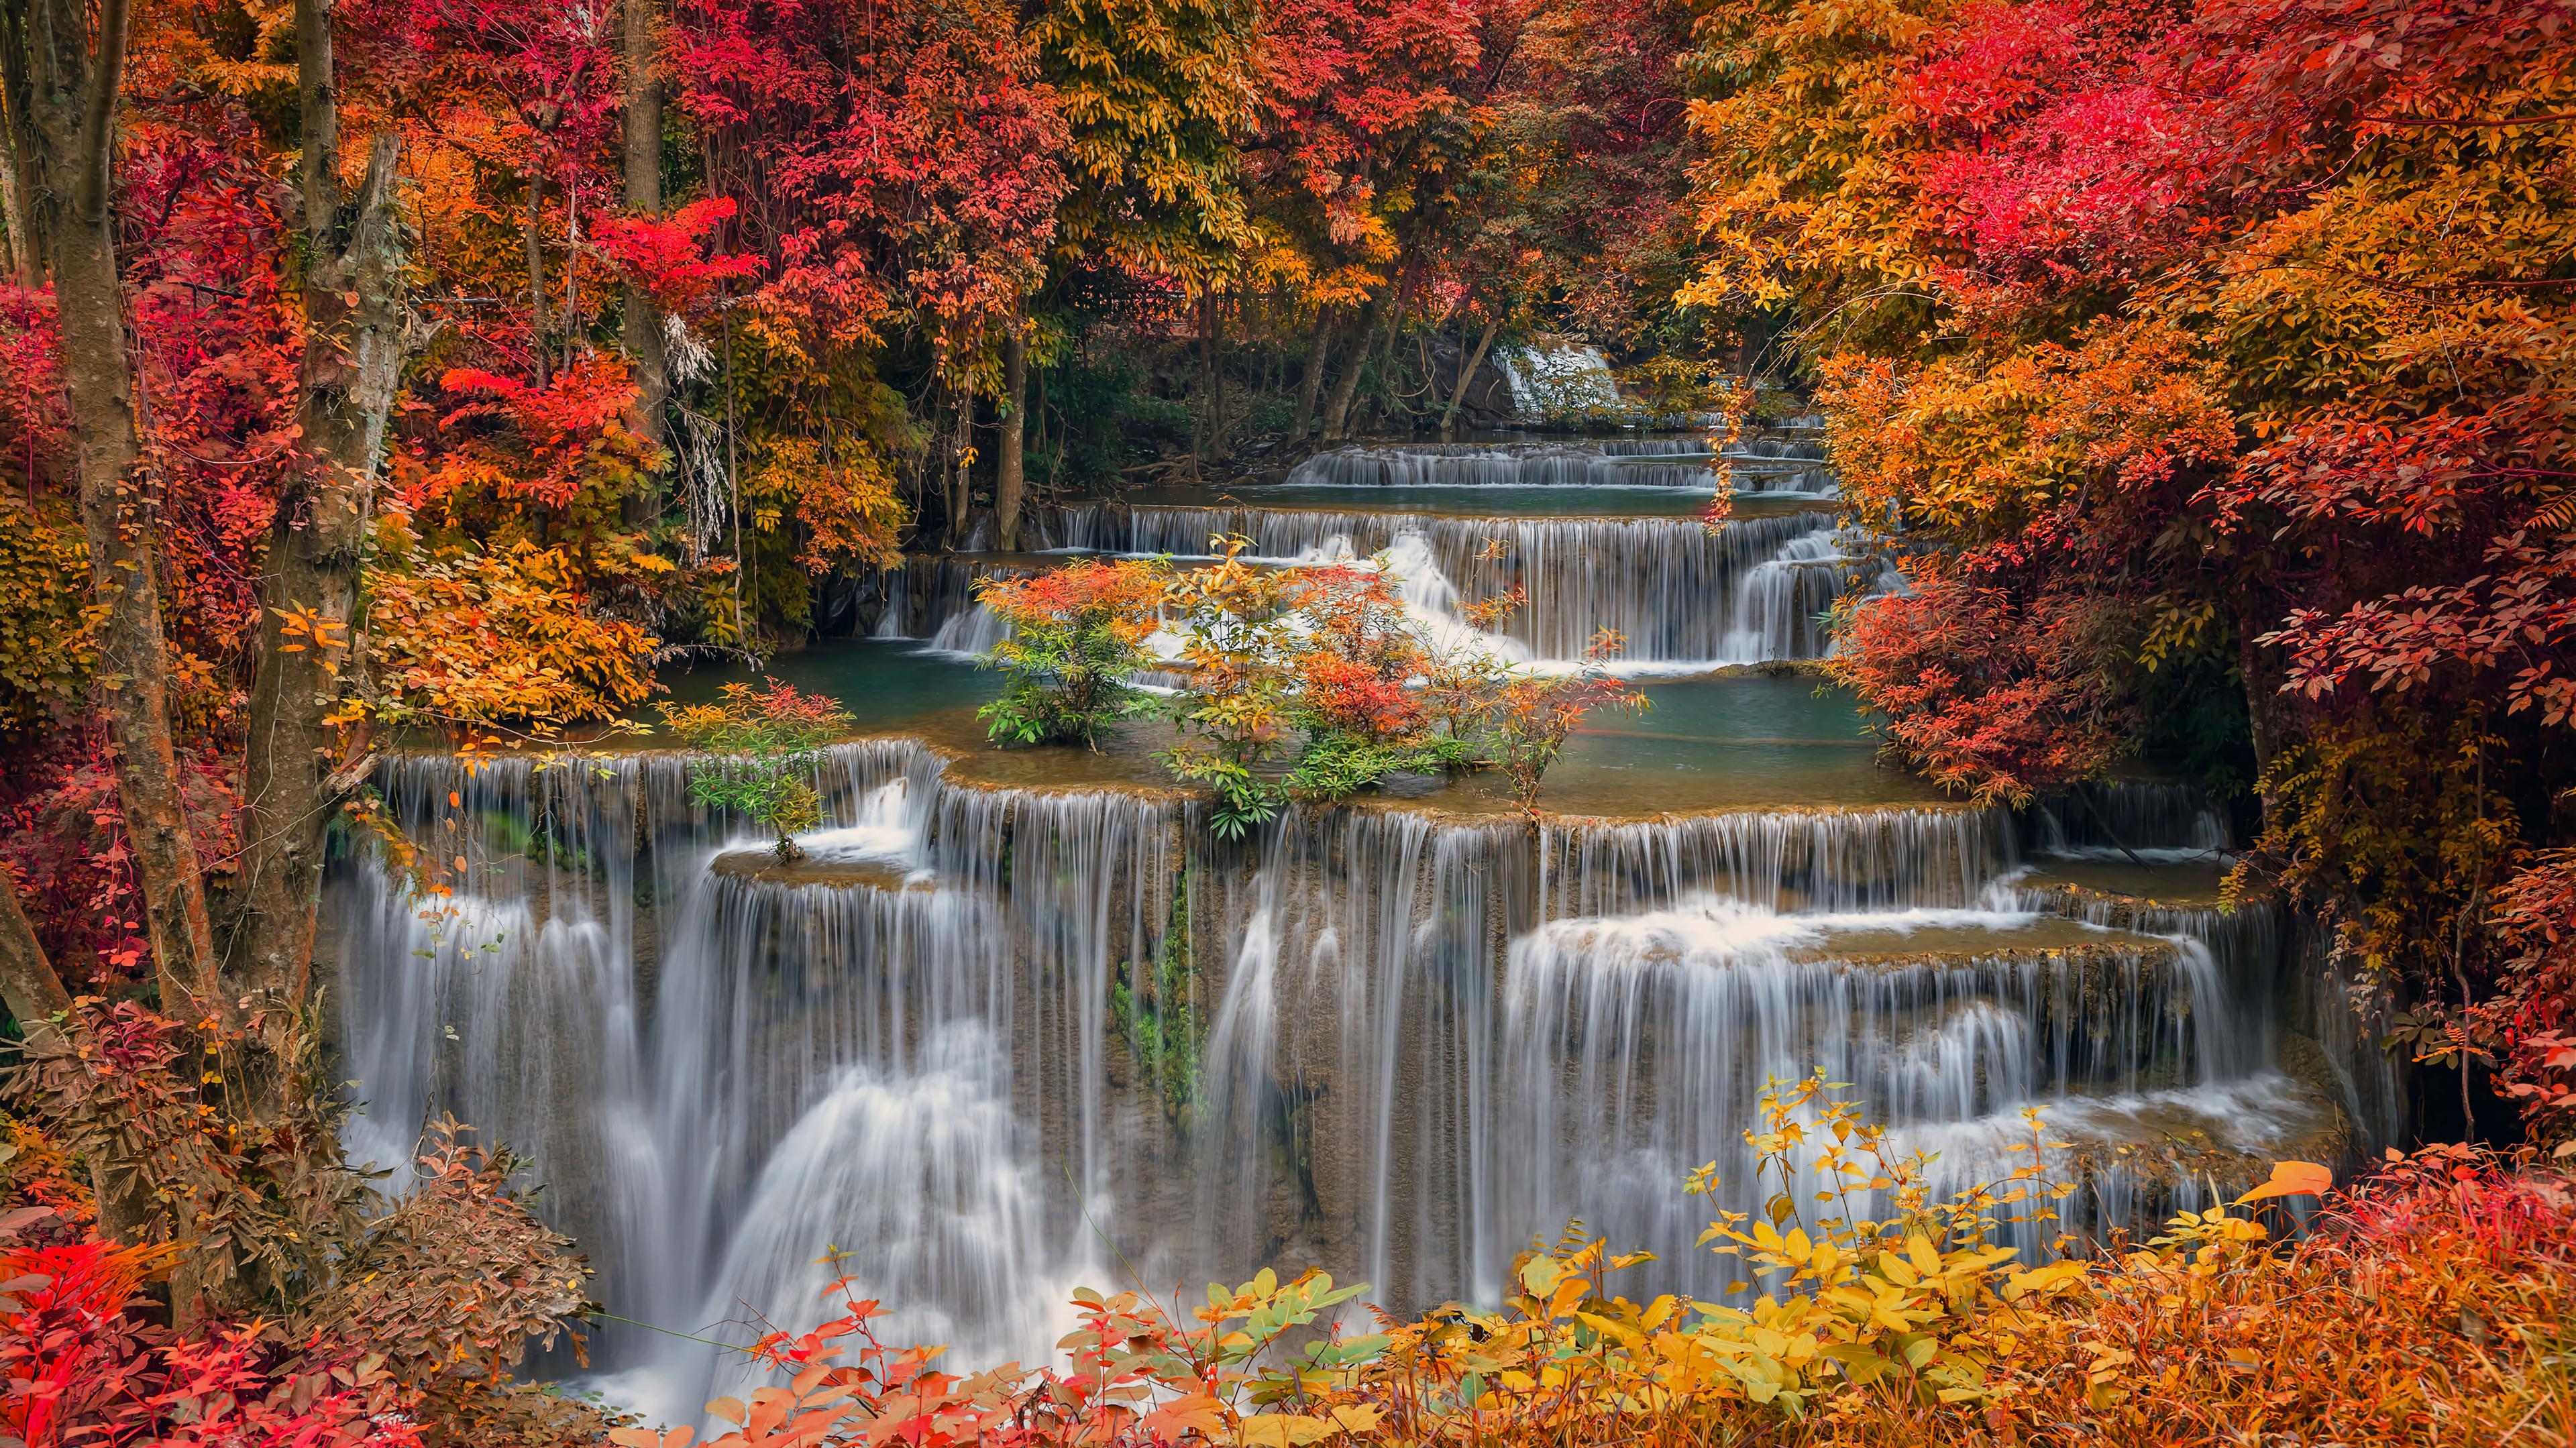 Waterfall Autumn Forest Nature Scenery Wallpaper iPhone Phone 4k